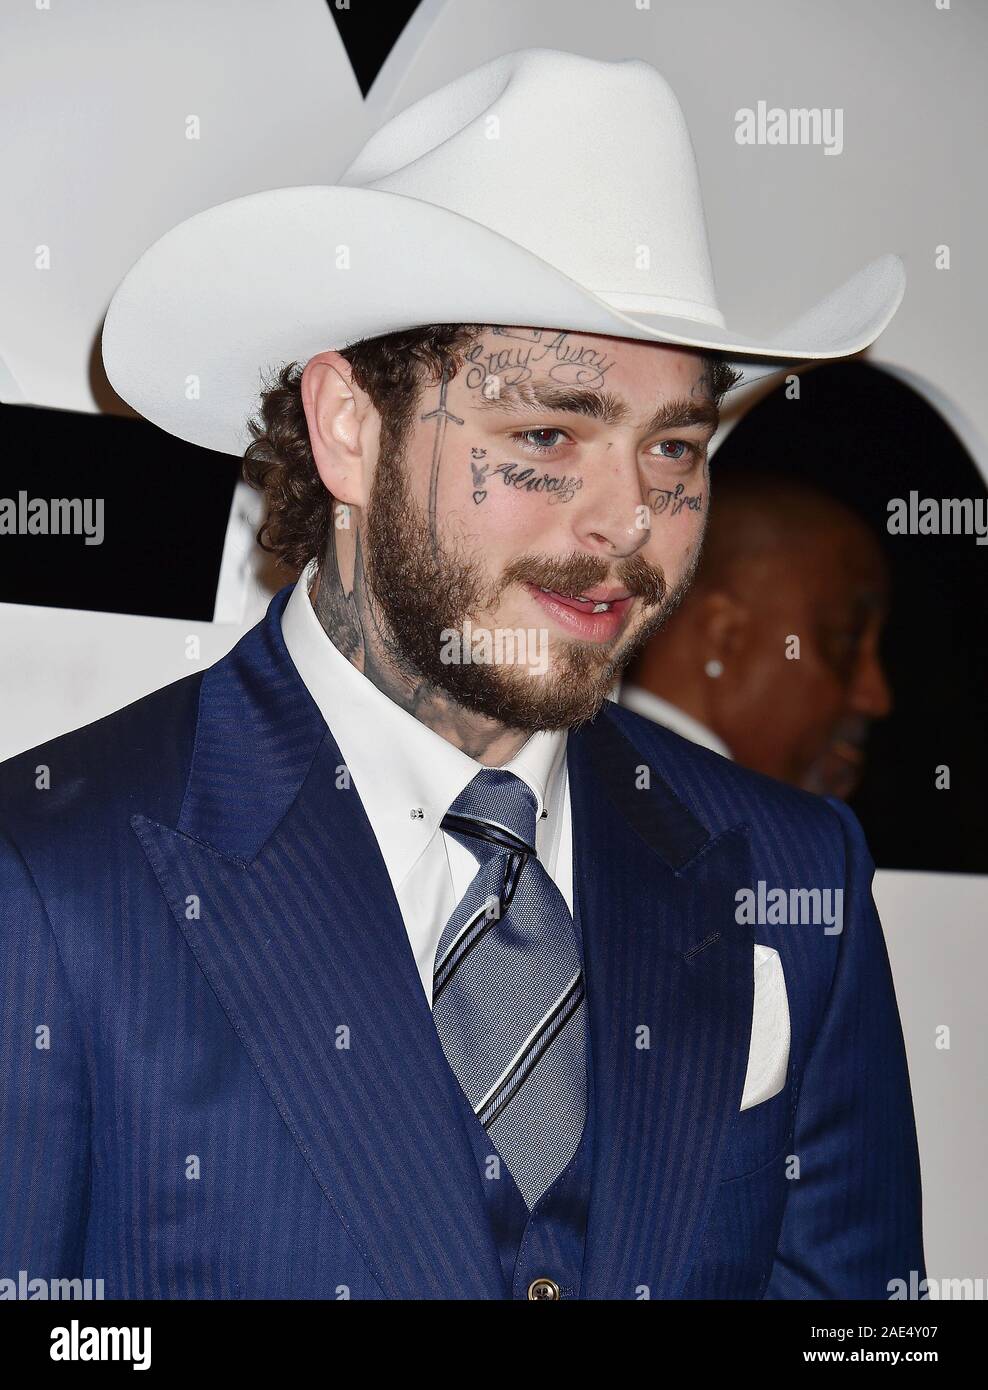 WEST HOLLYWOOD, CA - DECEMBER 05: Post Malone attends the 2019 GQ Men ...